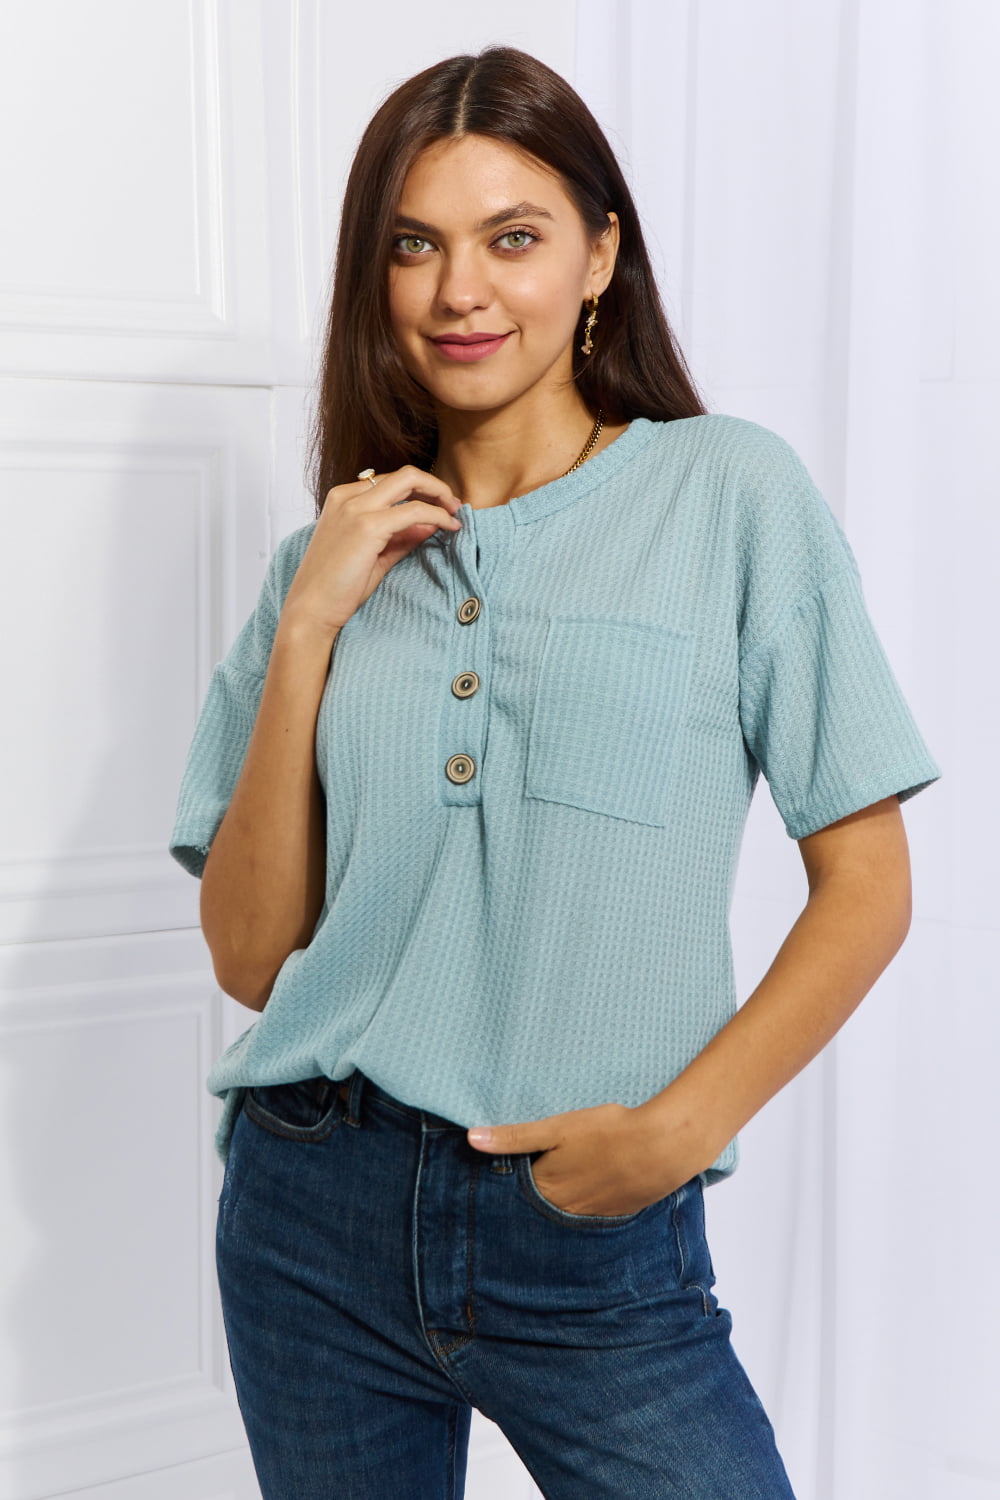 Heimish Made For You Full Size 1/4 Button Down Waffle Top in Blue